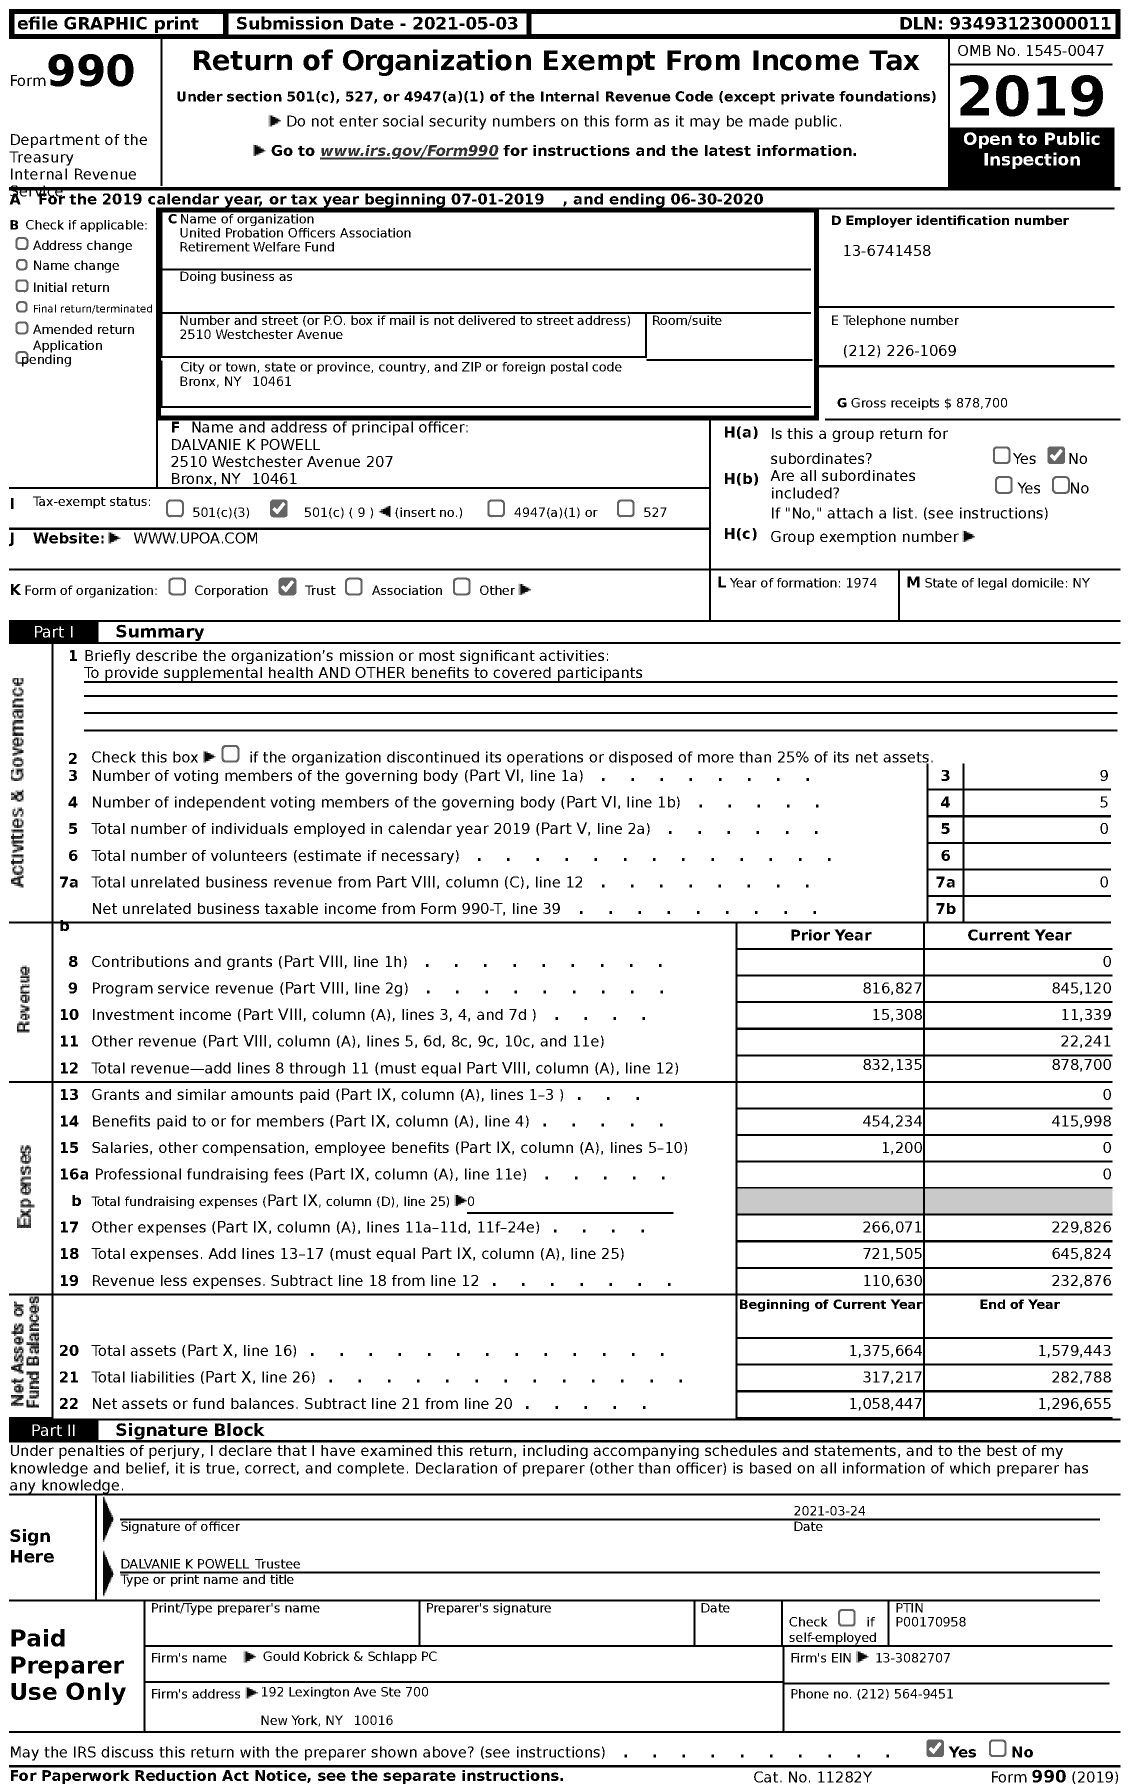 Image of first page of 2019 Form 990 for United Probation Officers Association Retirement Welfare Fund